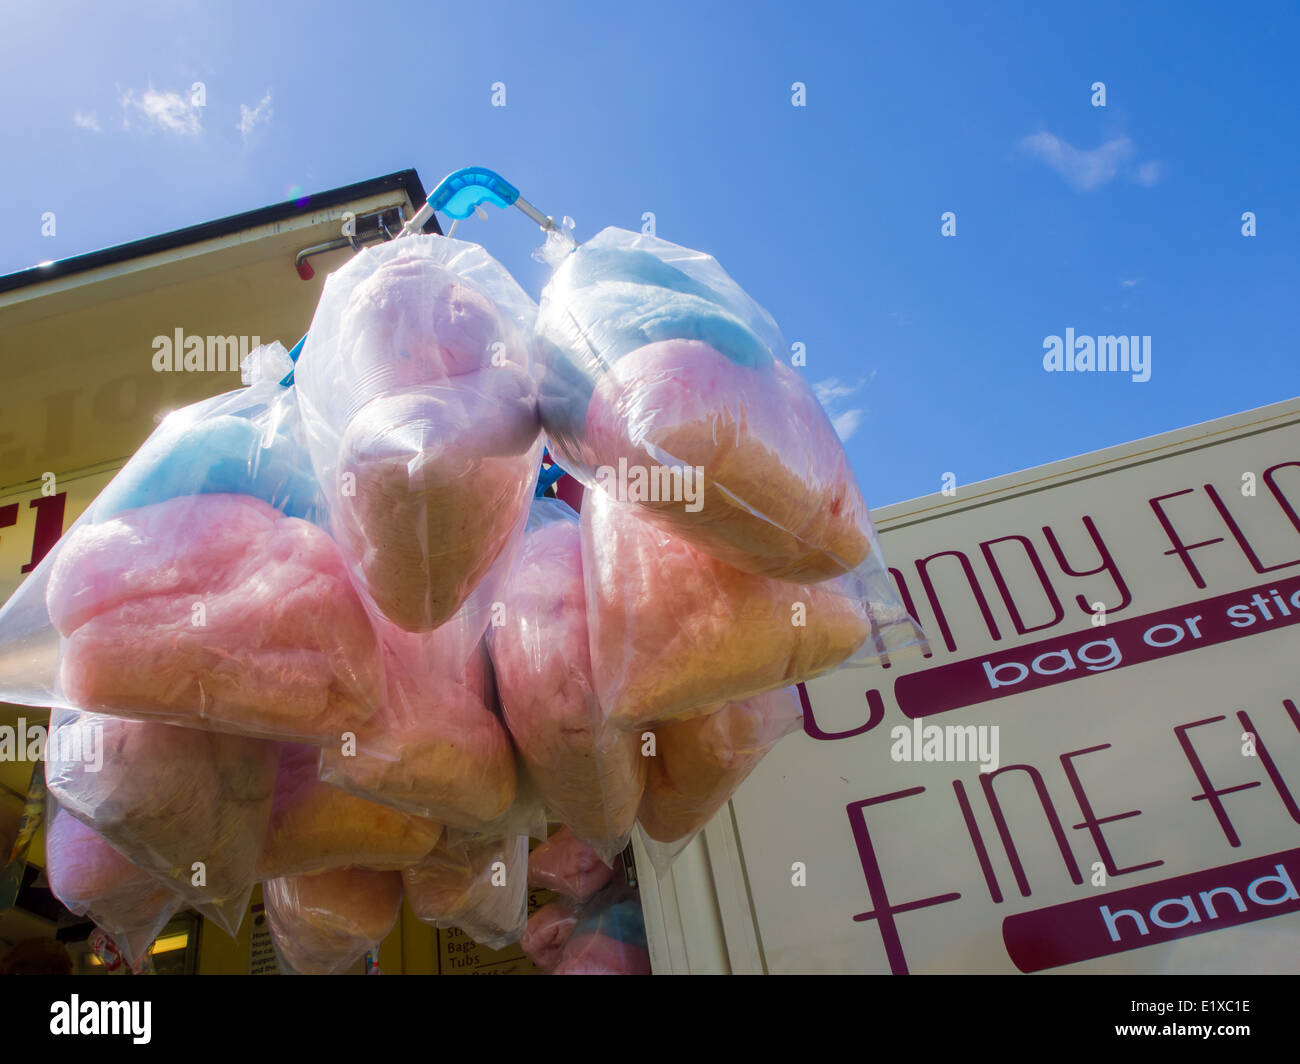 Bags of candy floss on sale at a fairground stall and hanging against a blue sky Stock Photo